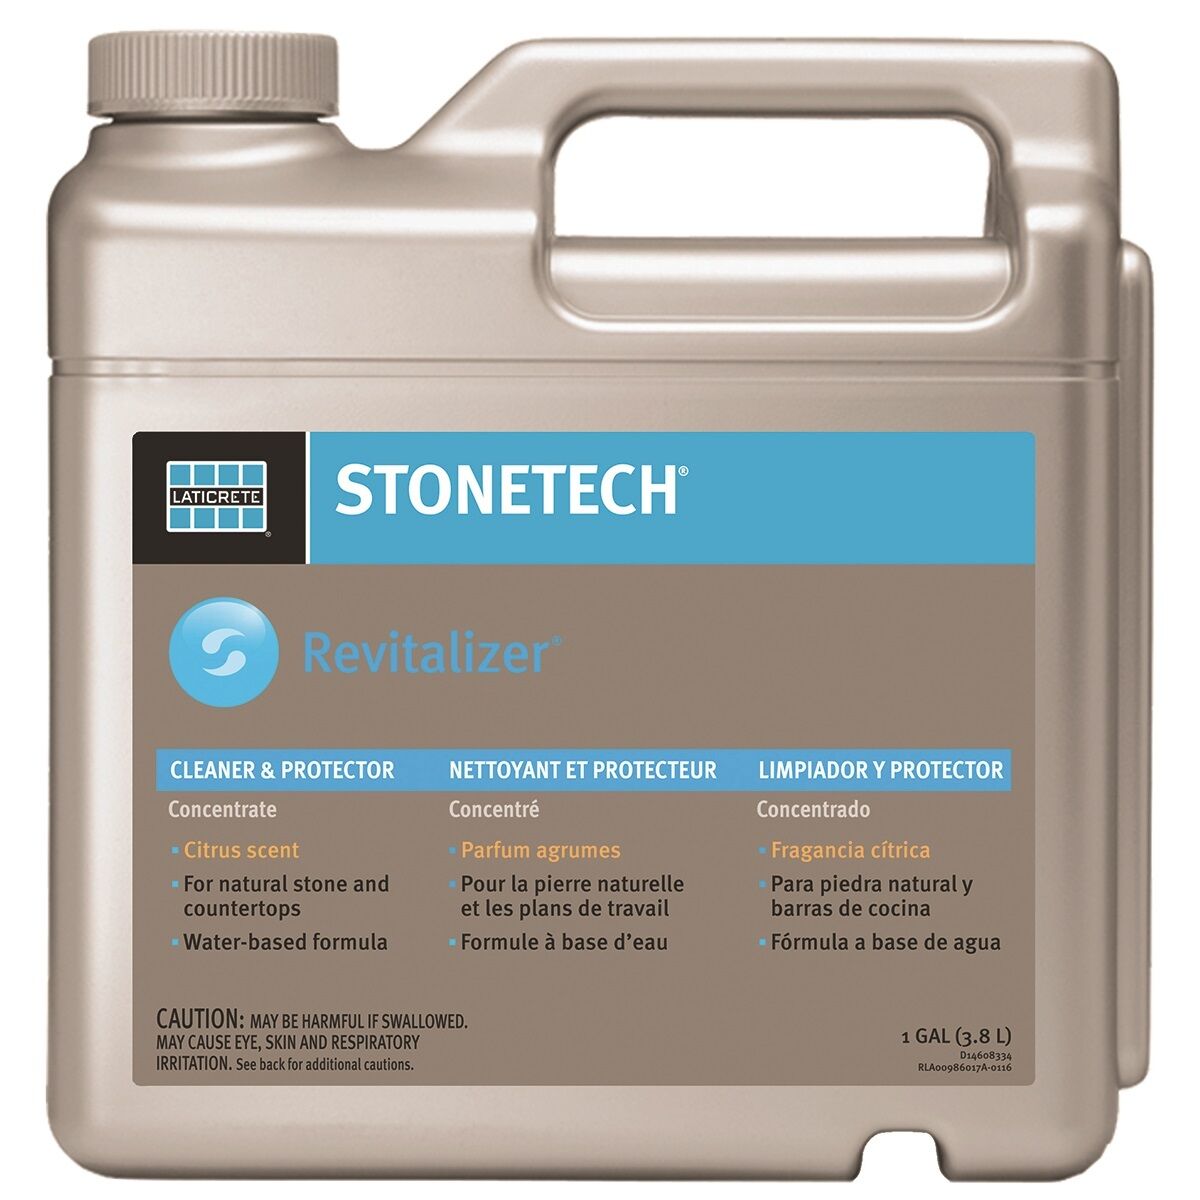 Stonetech Revitalizer Cleaner & Protector- Gallon Concentrate